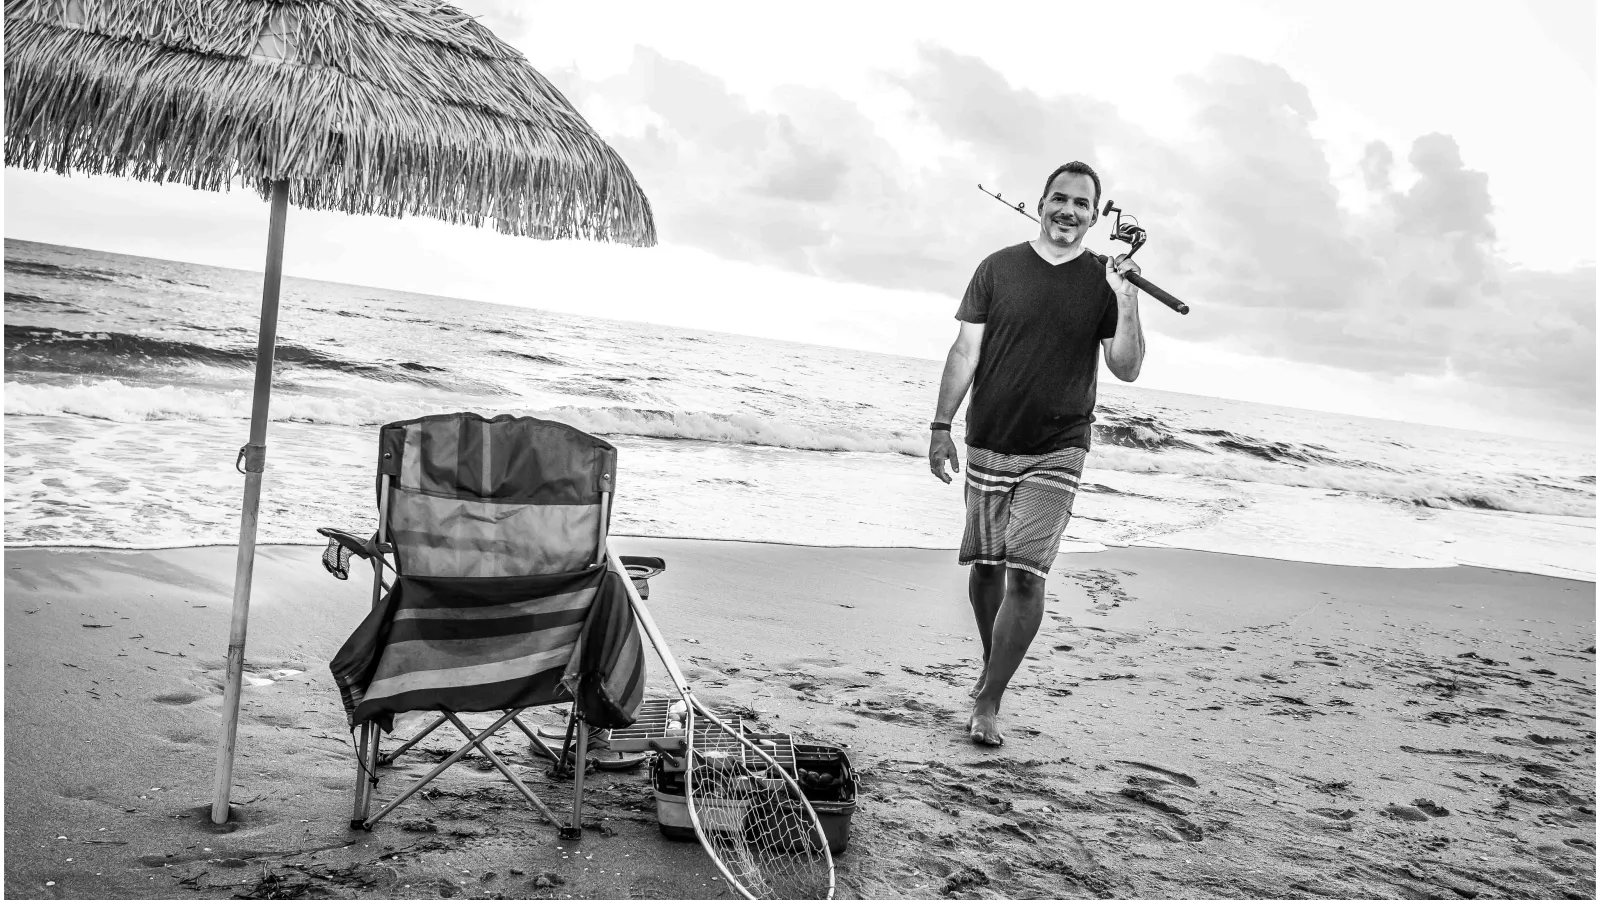 a person holding a tennis racket and a chair on a beach